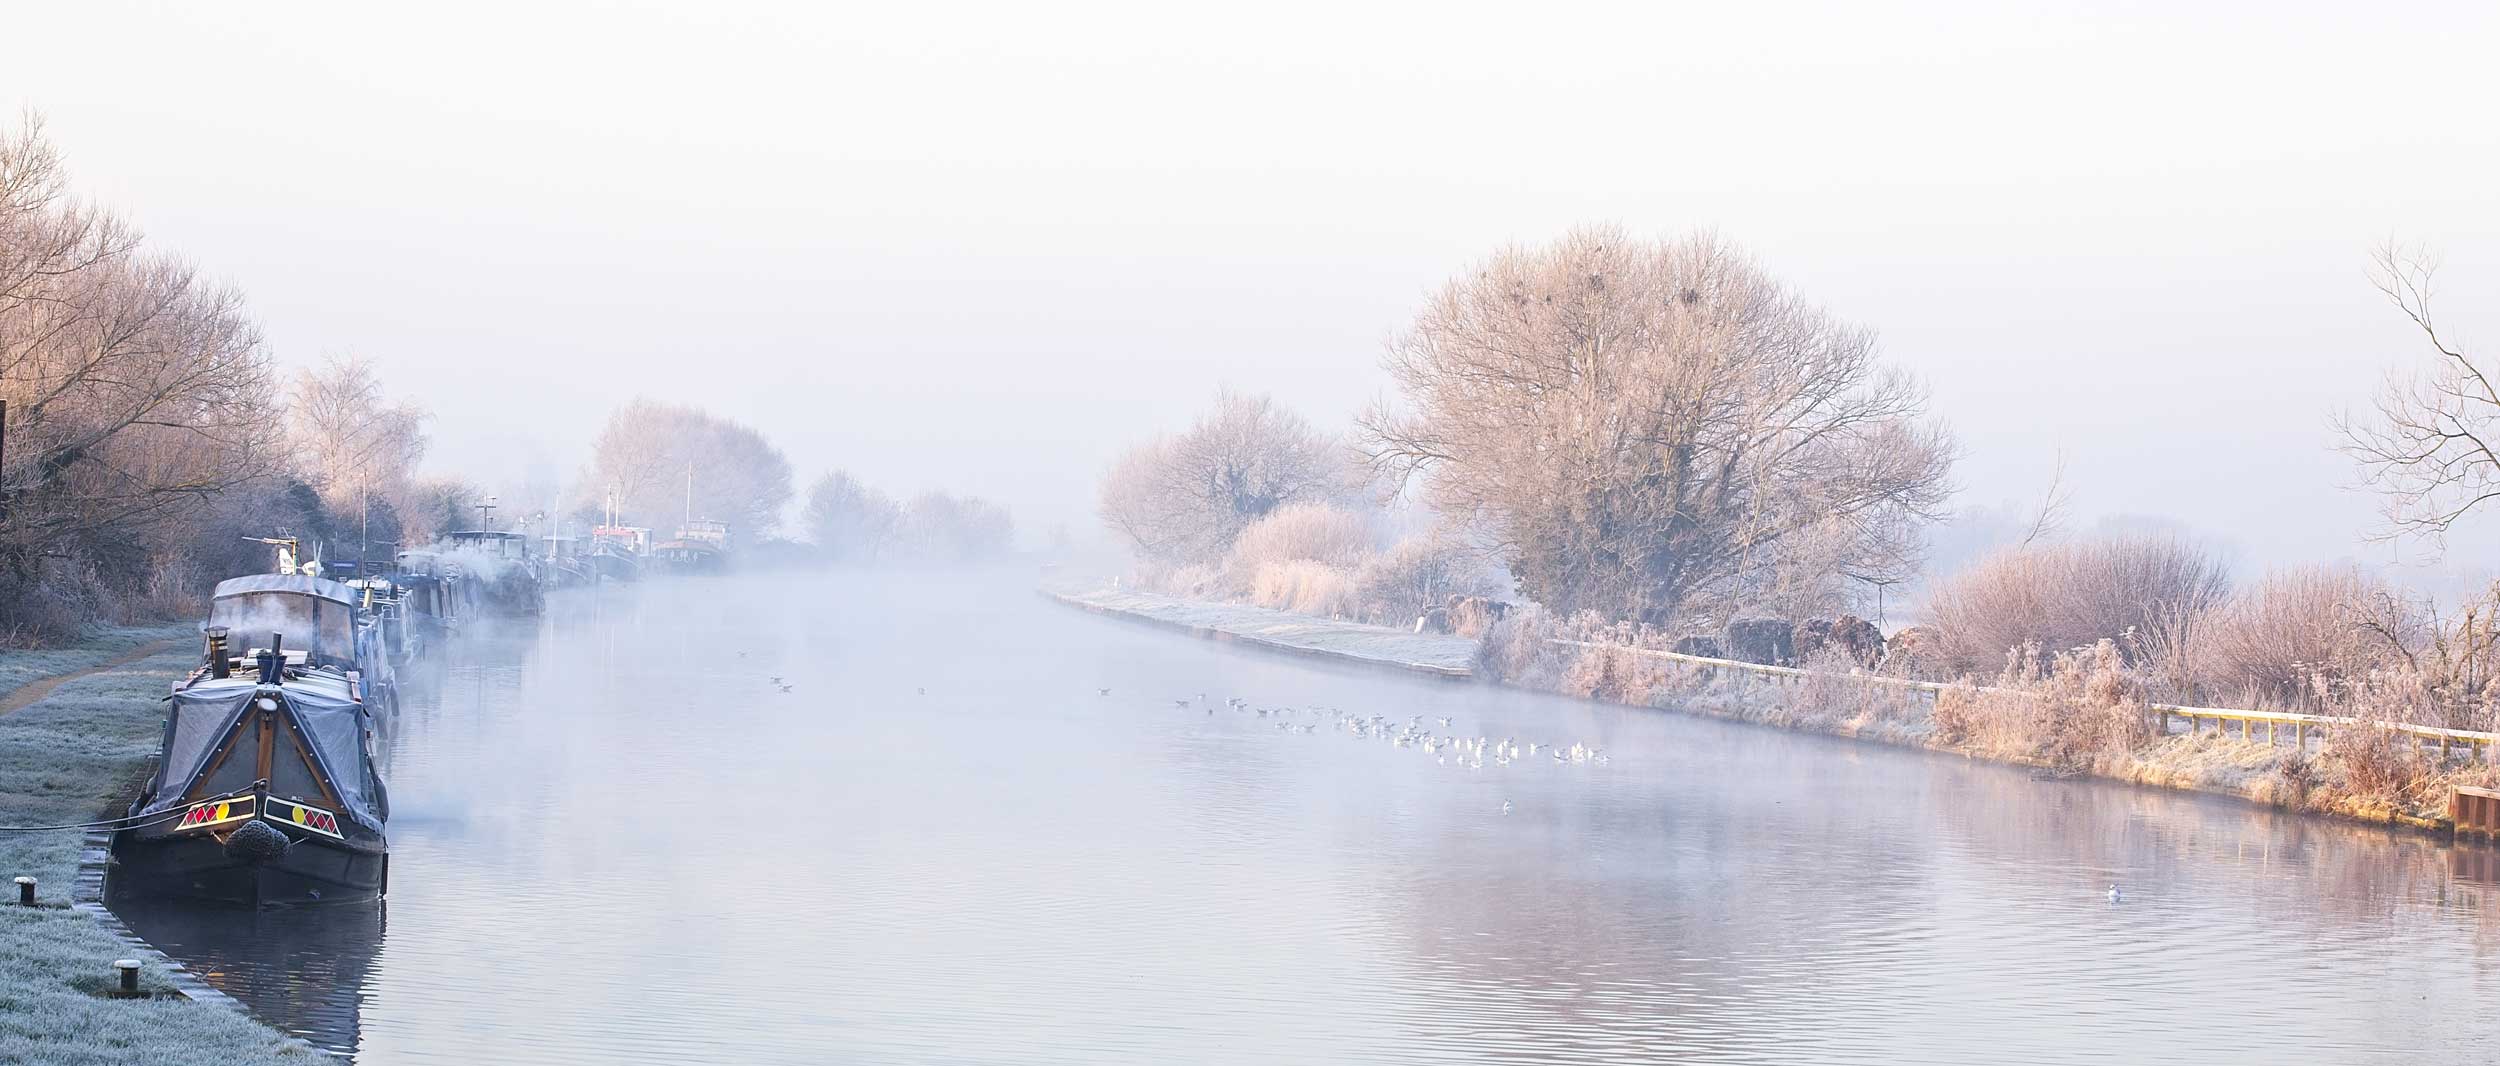 The Gloucester and Sharpness Canal on a cold winter’s morning, from Patch Bridge, Gloucestershire, England, UK.